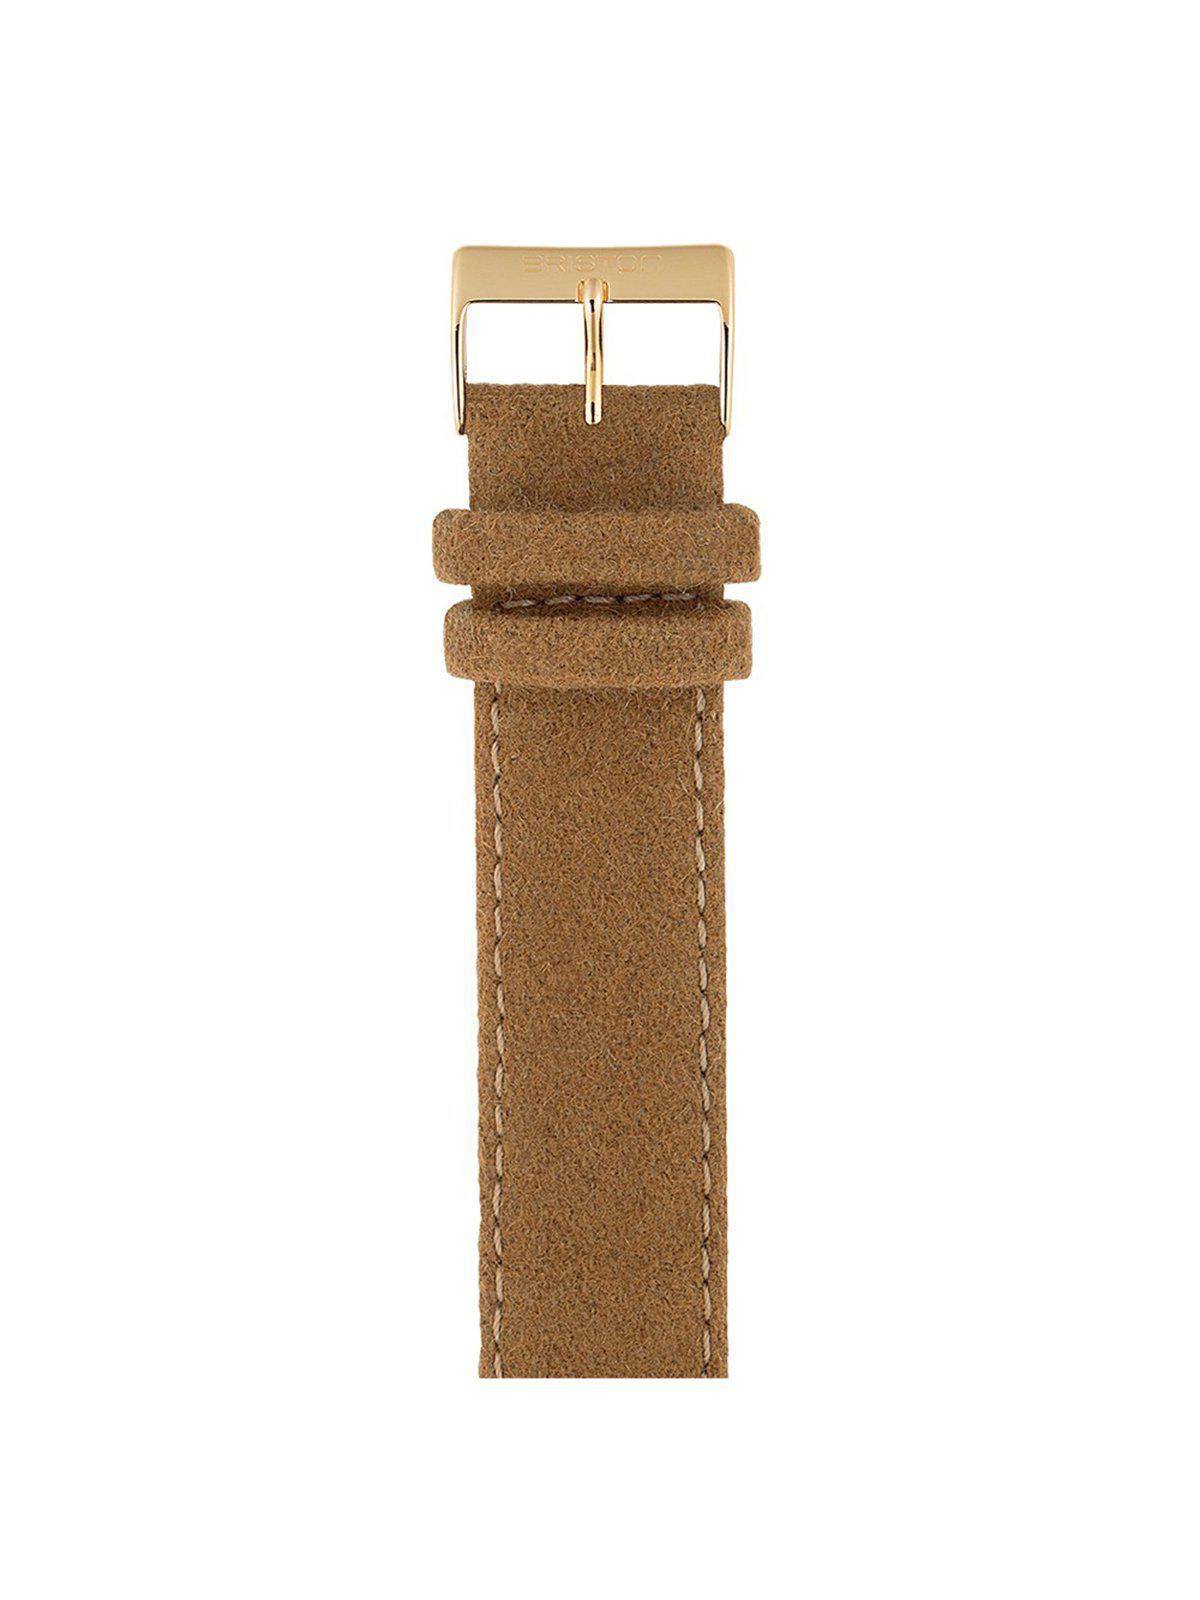 Briston Leather Flannel Strap Camel Yellow Gold 20mm - MORE by Morello Indonesia